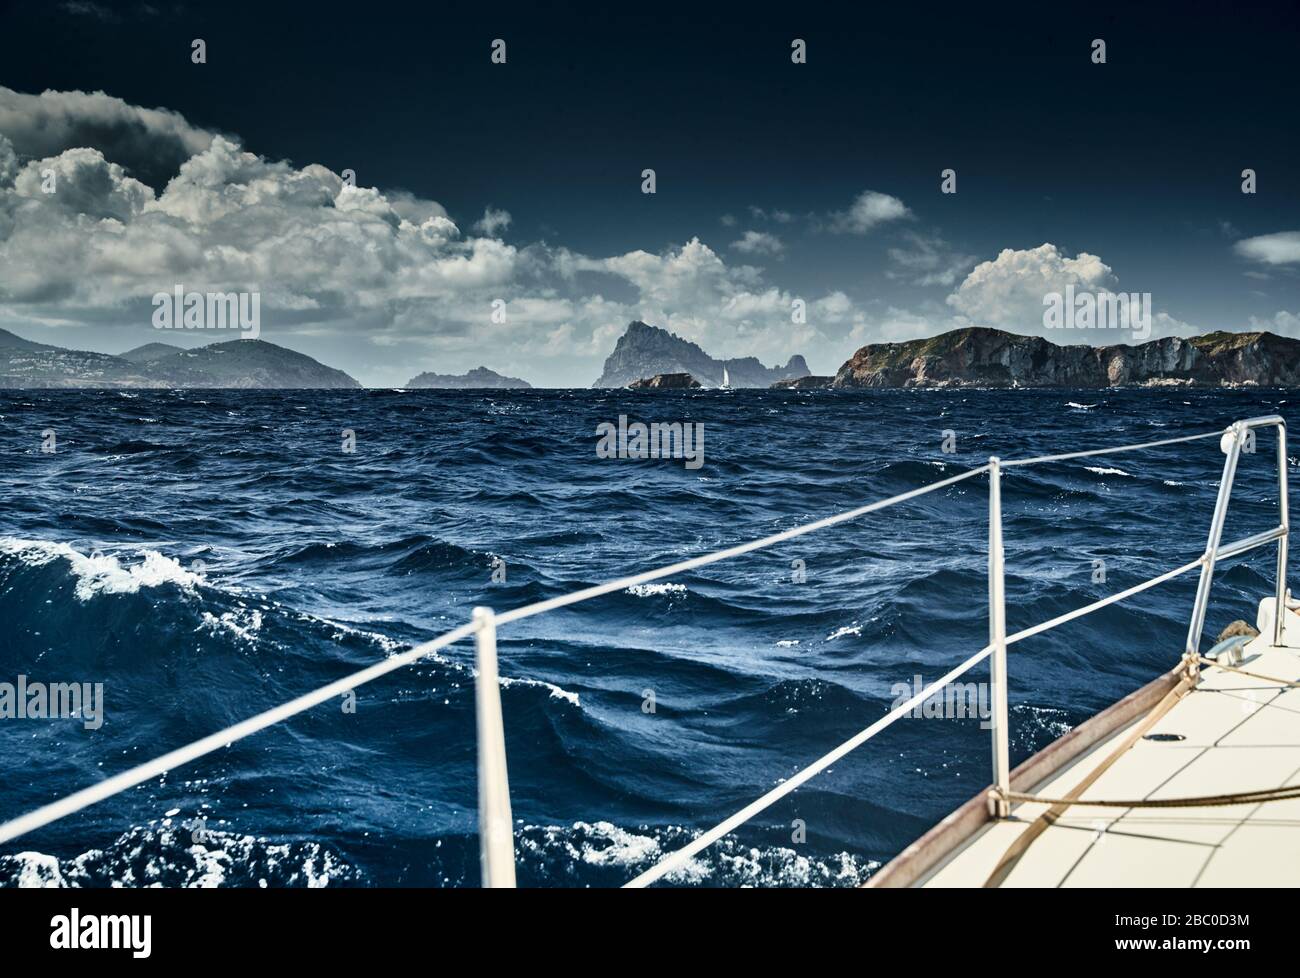 The view of the sea and mountains from the sailboat, edge of a board of the boat, slings and ropes, splashes from under the boat, sunny weather Stock Photo